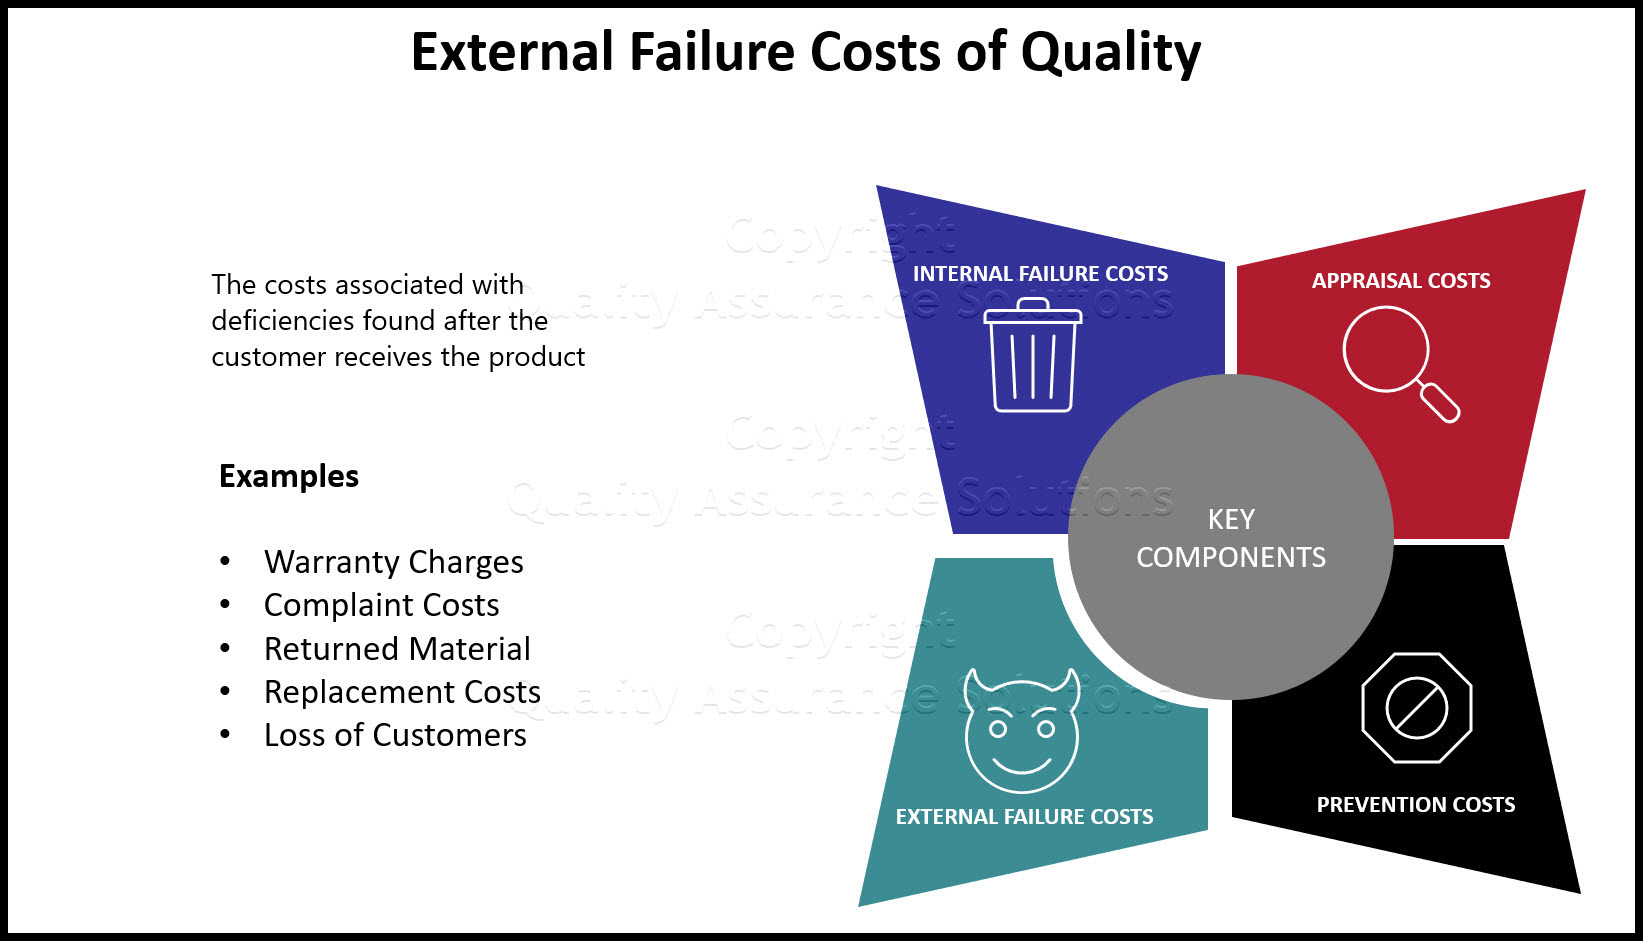 External Failure Costs of Quality